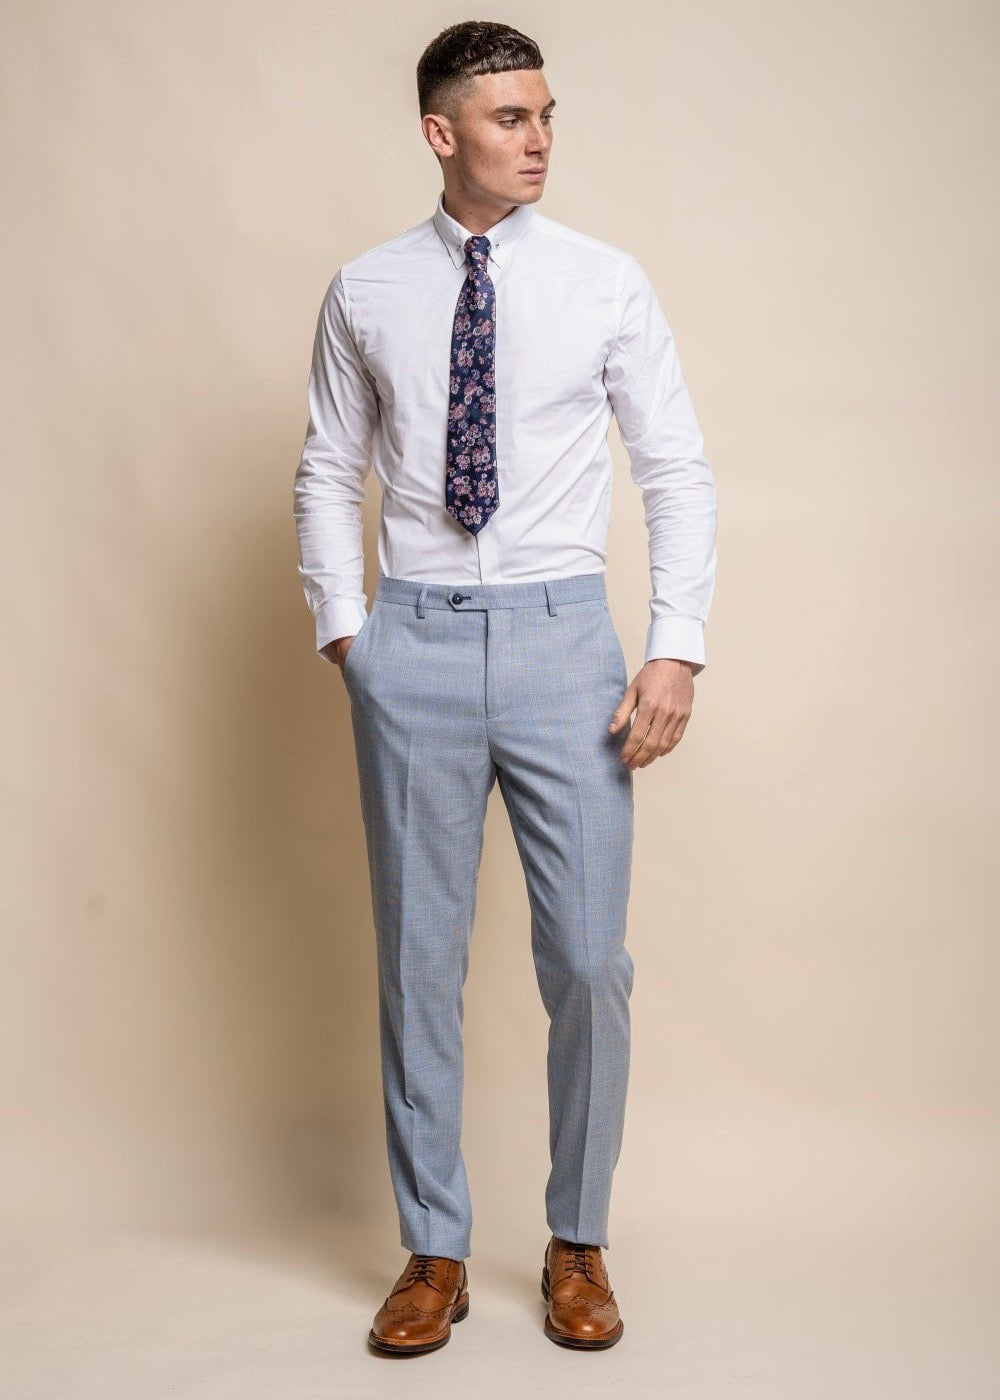 Miami sky suit for men, trousers shown from front with white shirt.